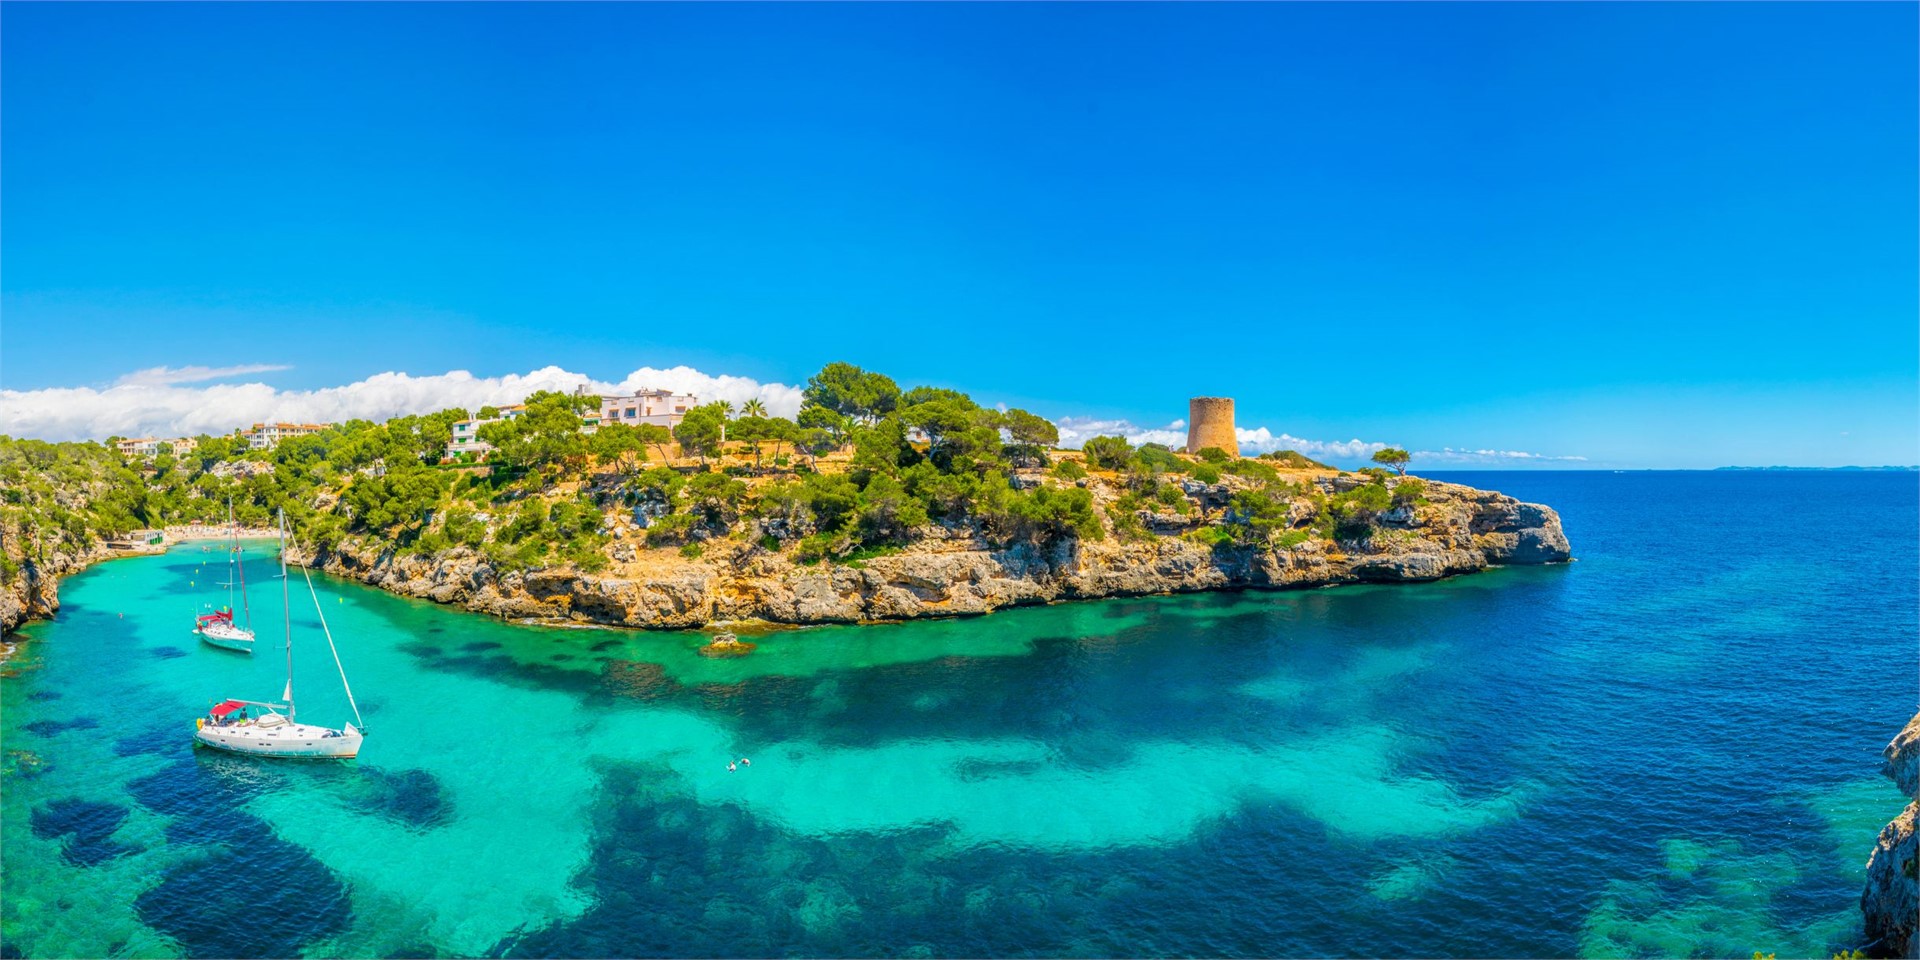 Hotels and accommodation in Mallorca, Spain
